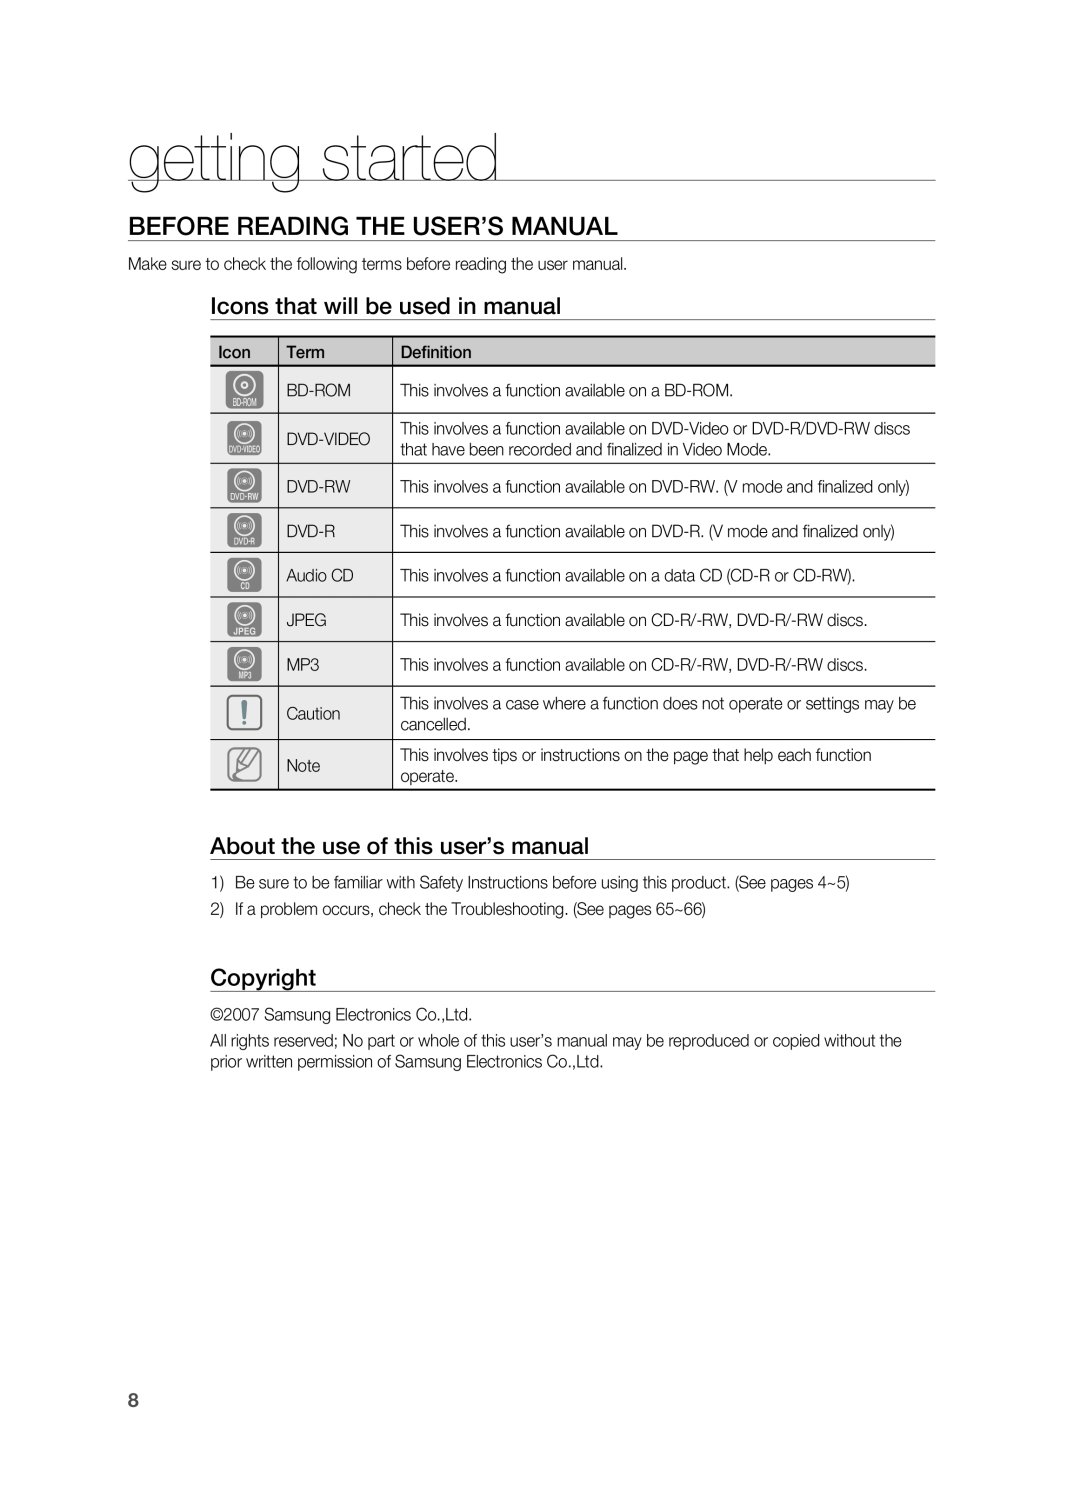 Samsung AH68-02019S getting started, Before Reading the User’s Manual, Icons that will be used in manual, Copyright 